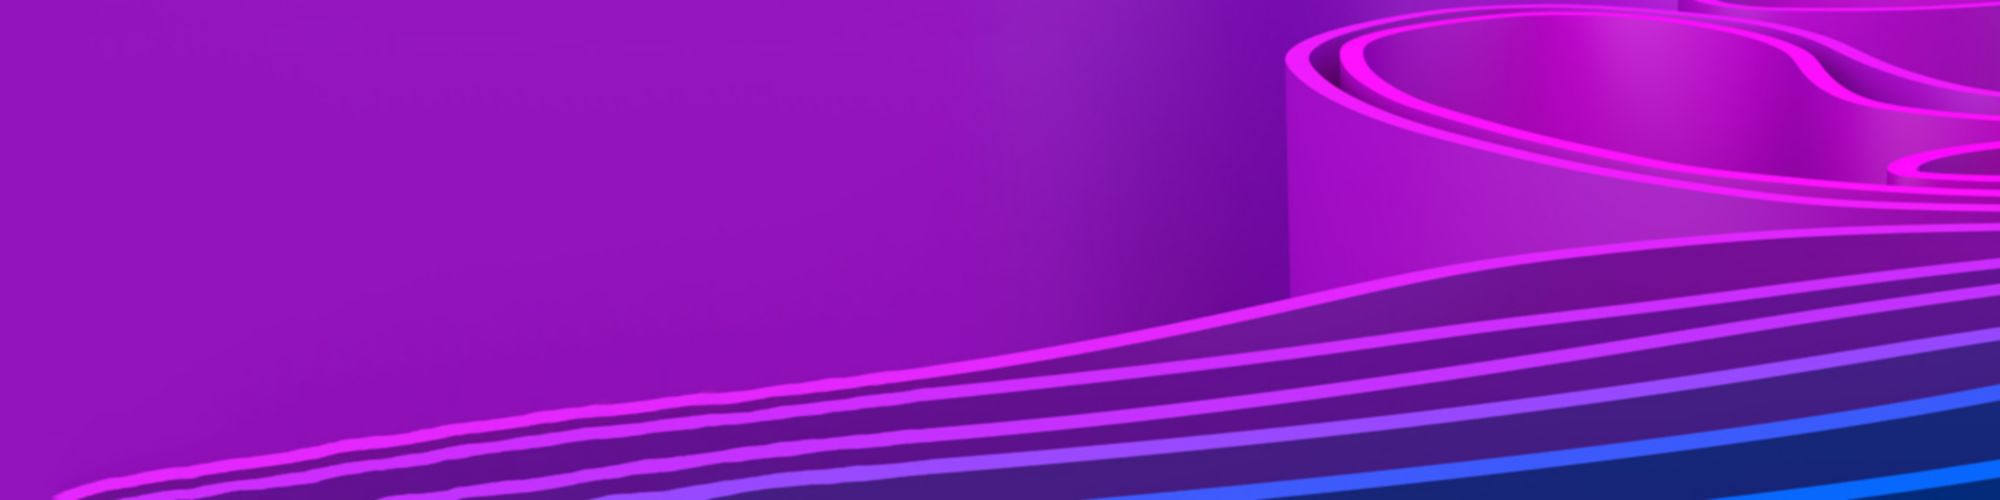 3d abstract purple stripes